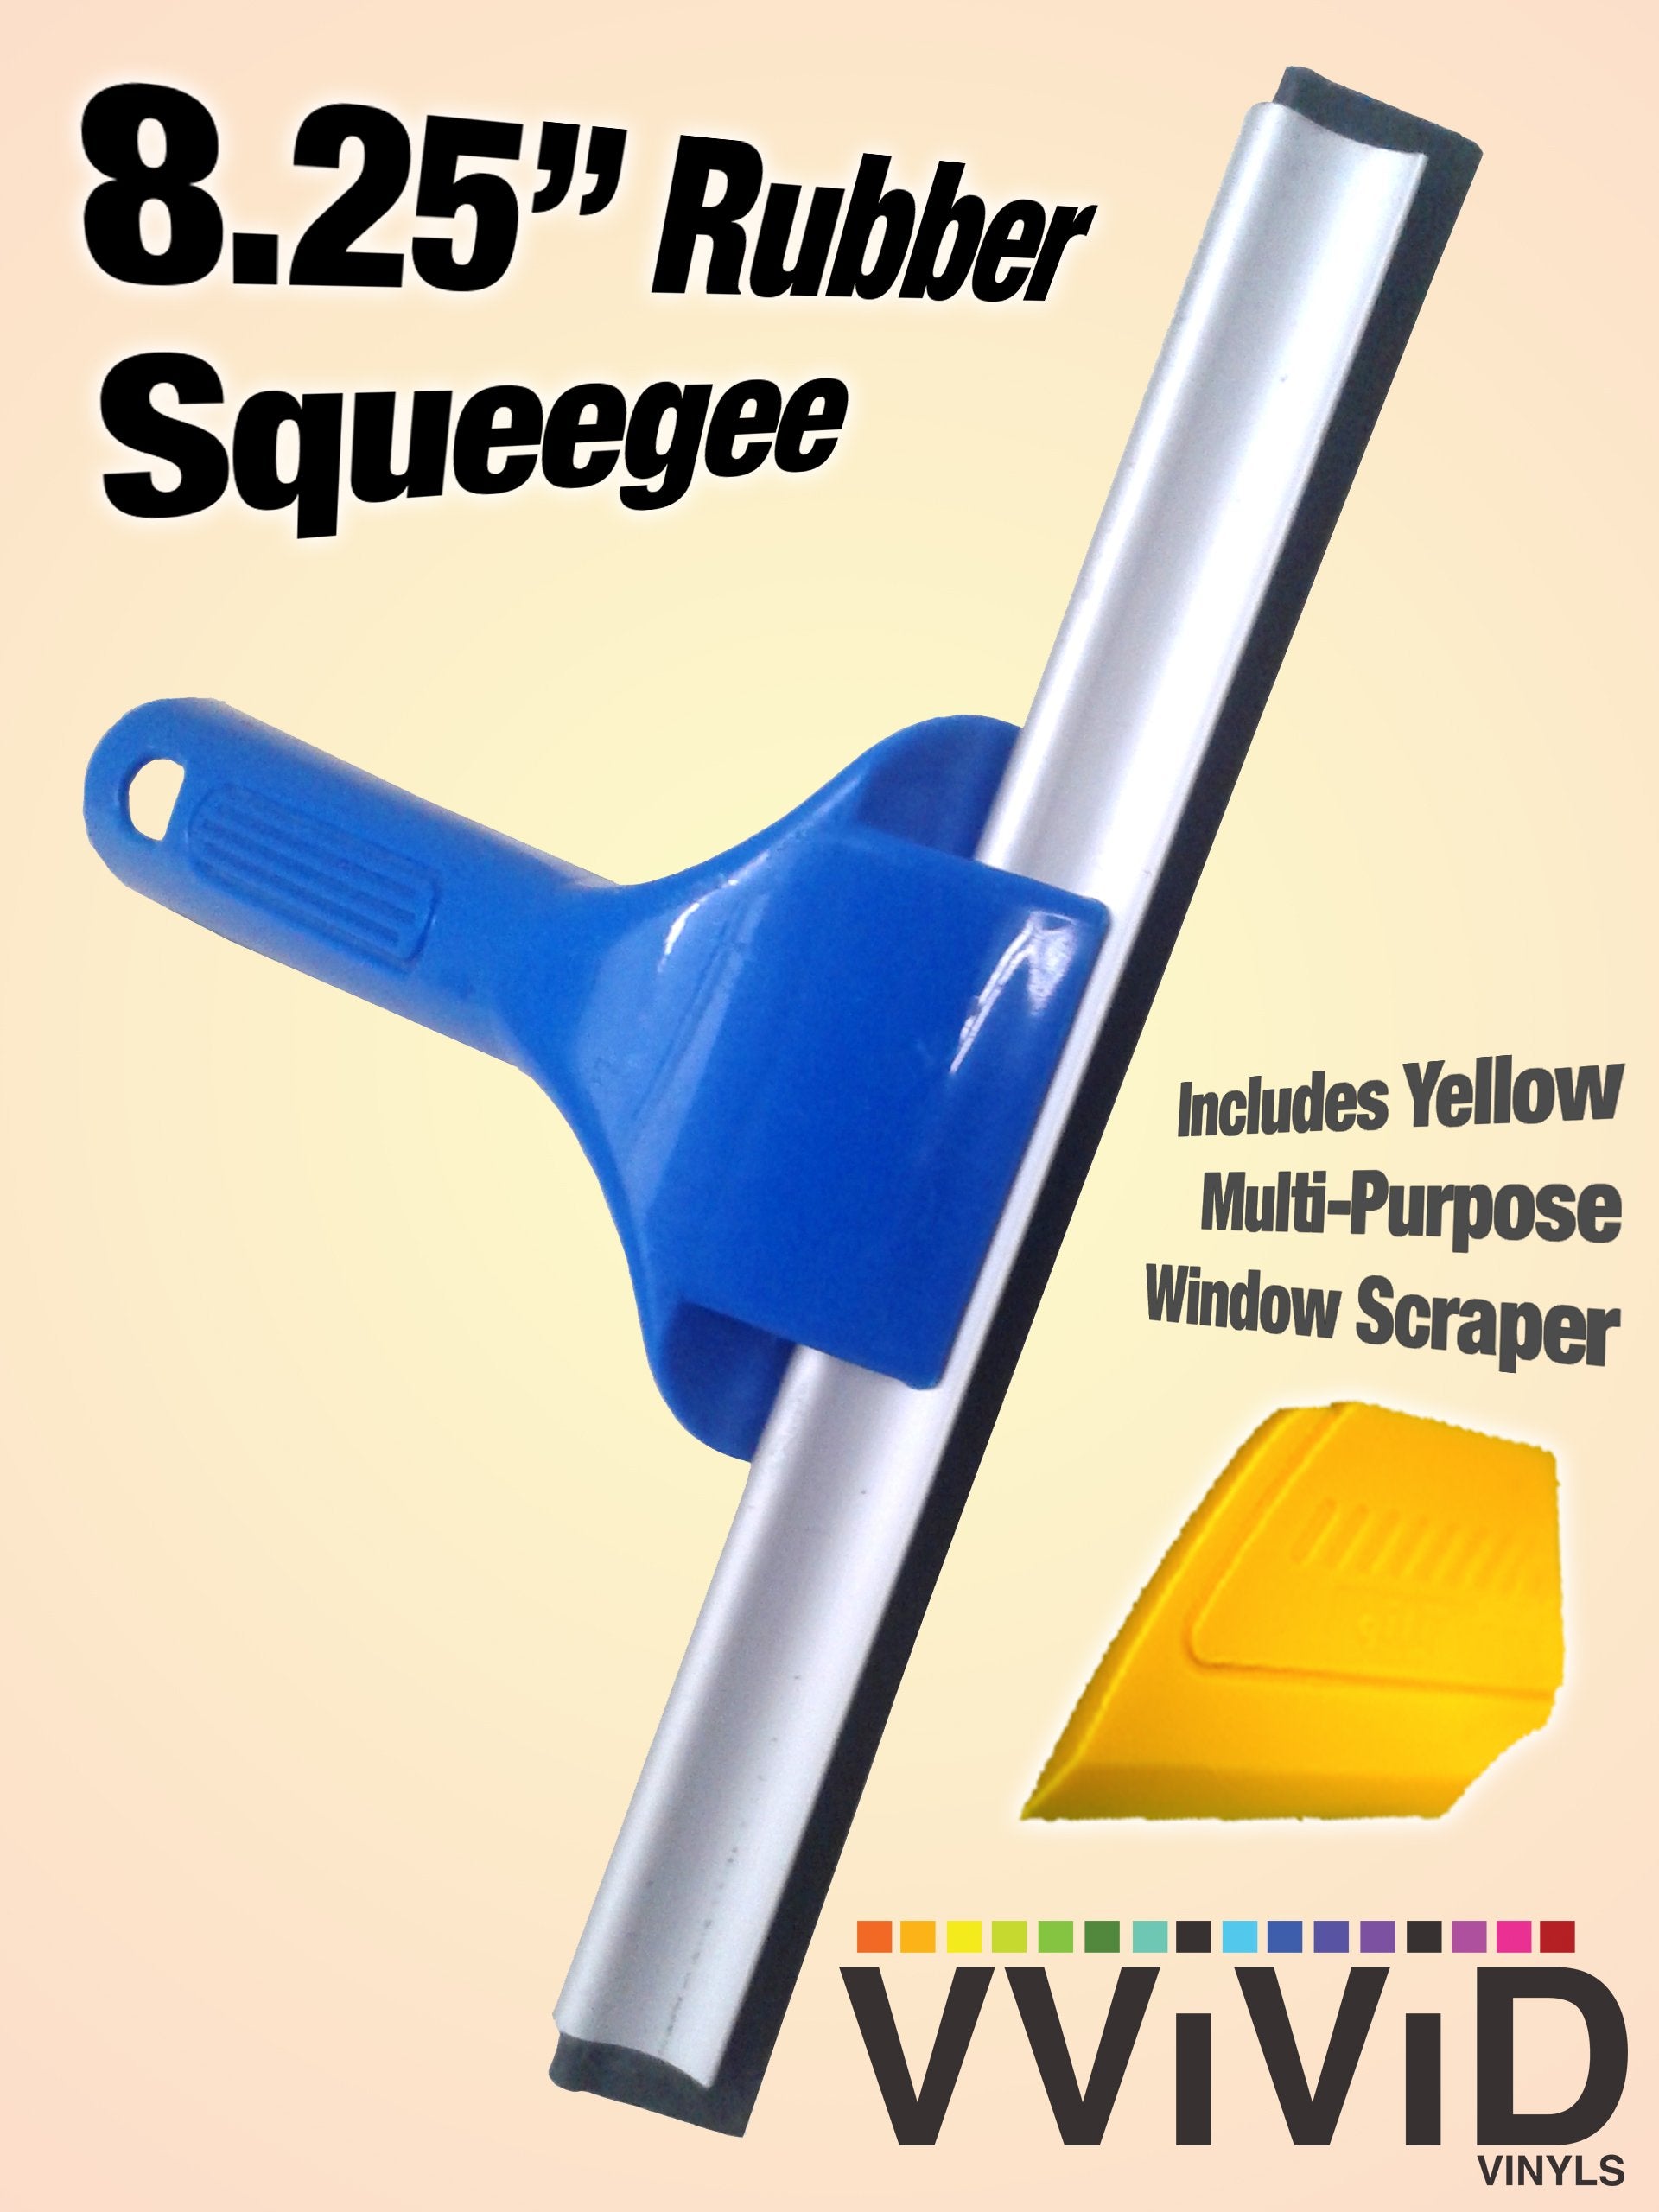 VViViD Blue Handheld All-Purpose Rubber Household Squeegee Including Yellow Multi-Purpose Window Scraper